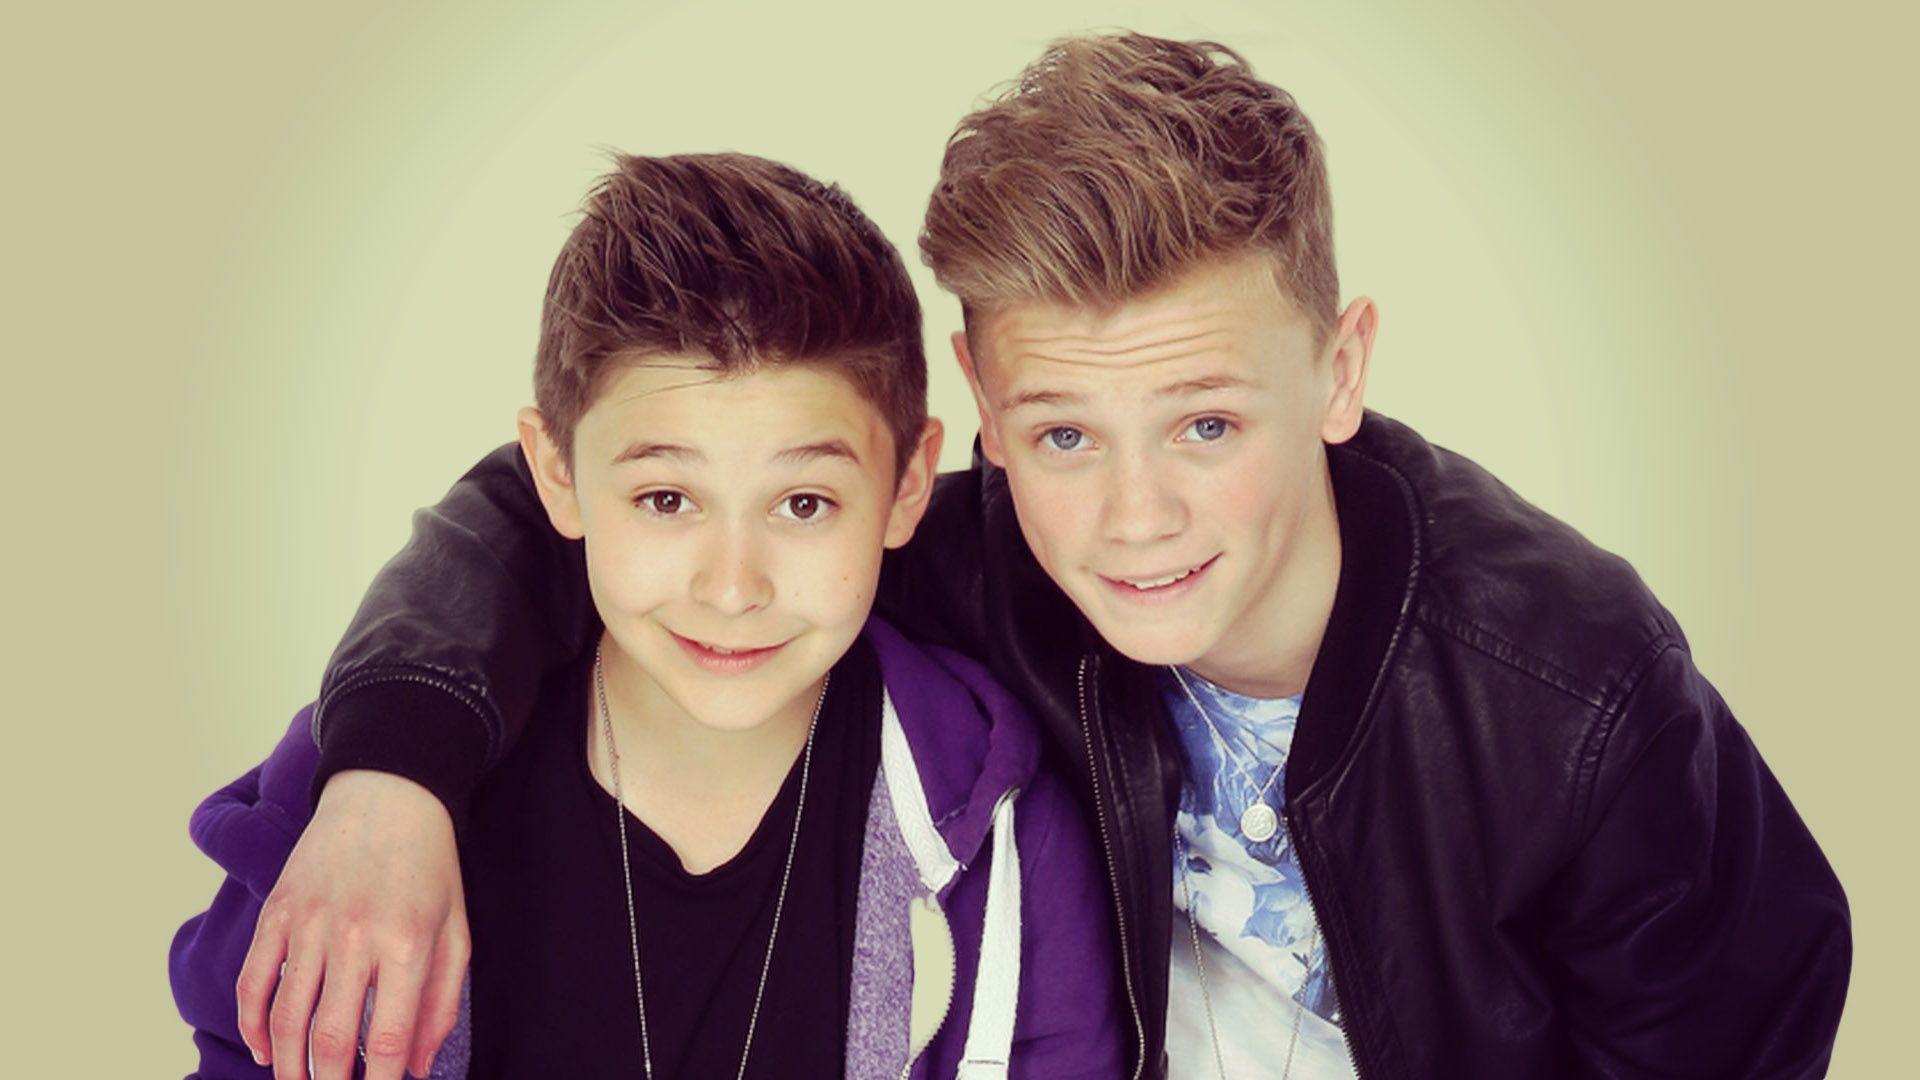 Bars And Melody Wallpapers Wallpaper Cave